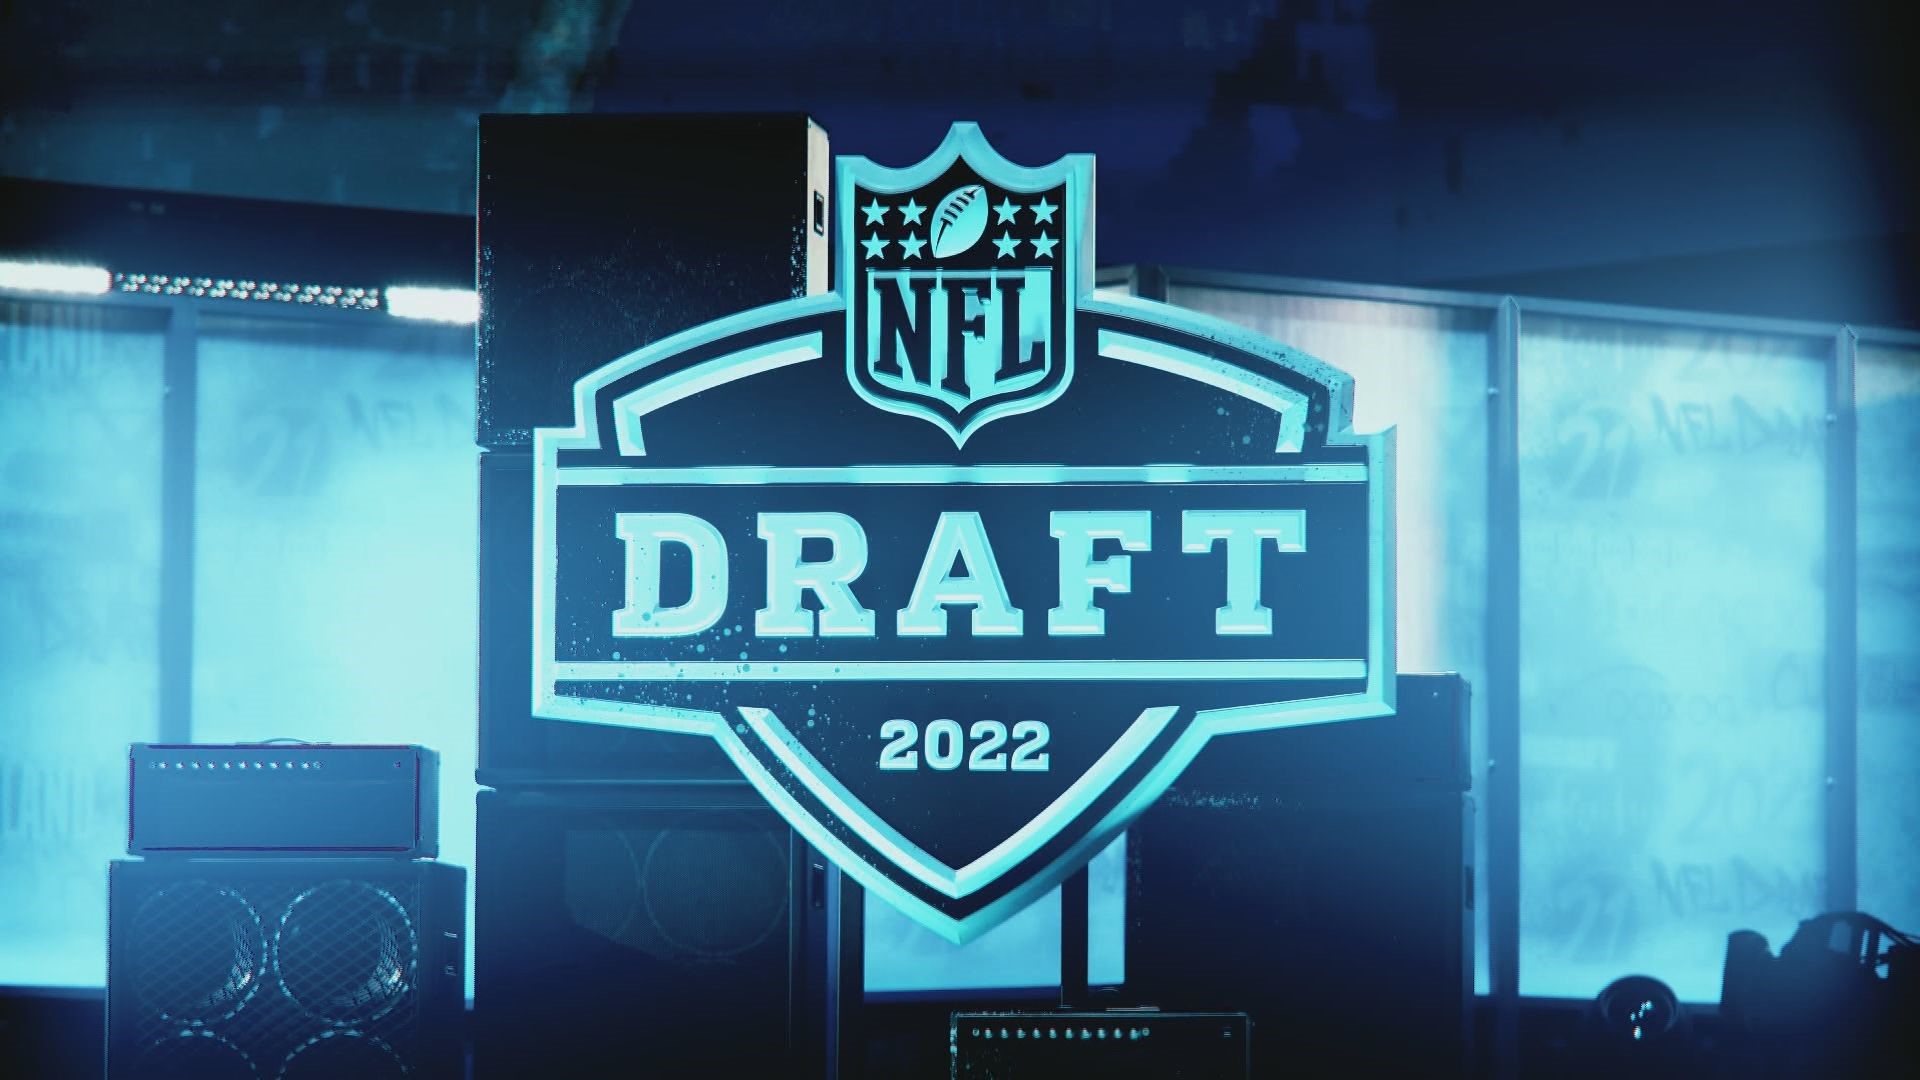 2022 NFL Draft: Stream live analysis with Locked On and TEGNA